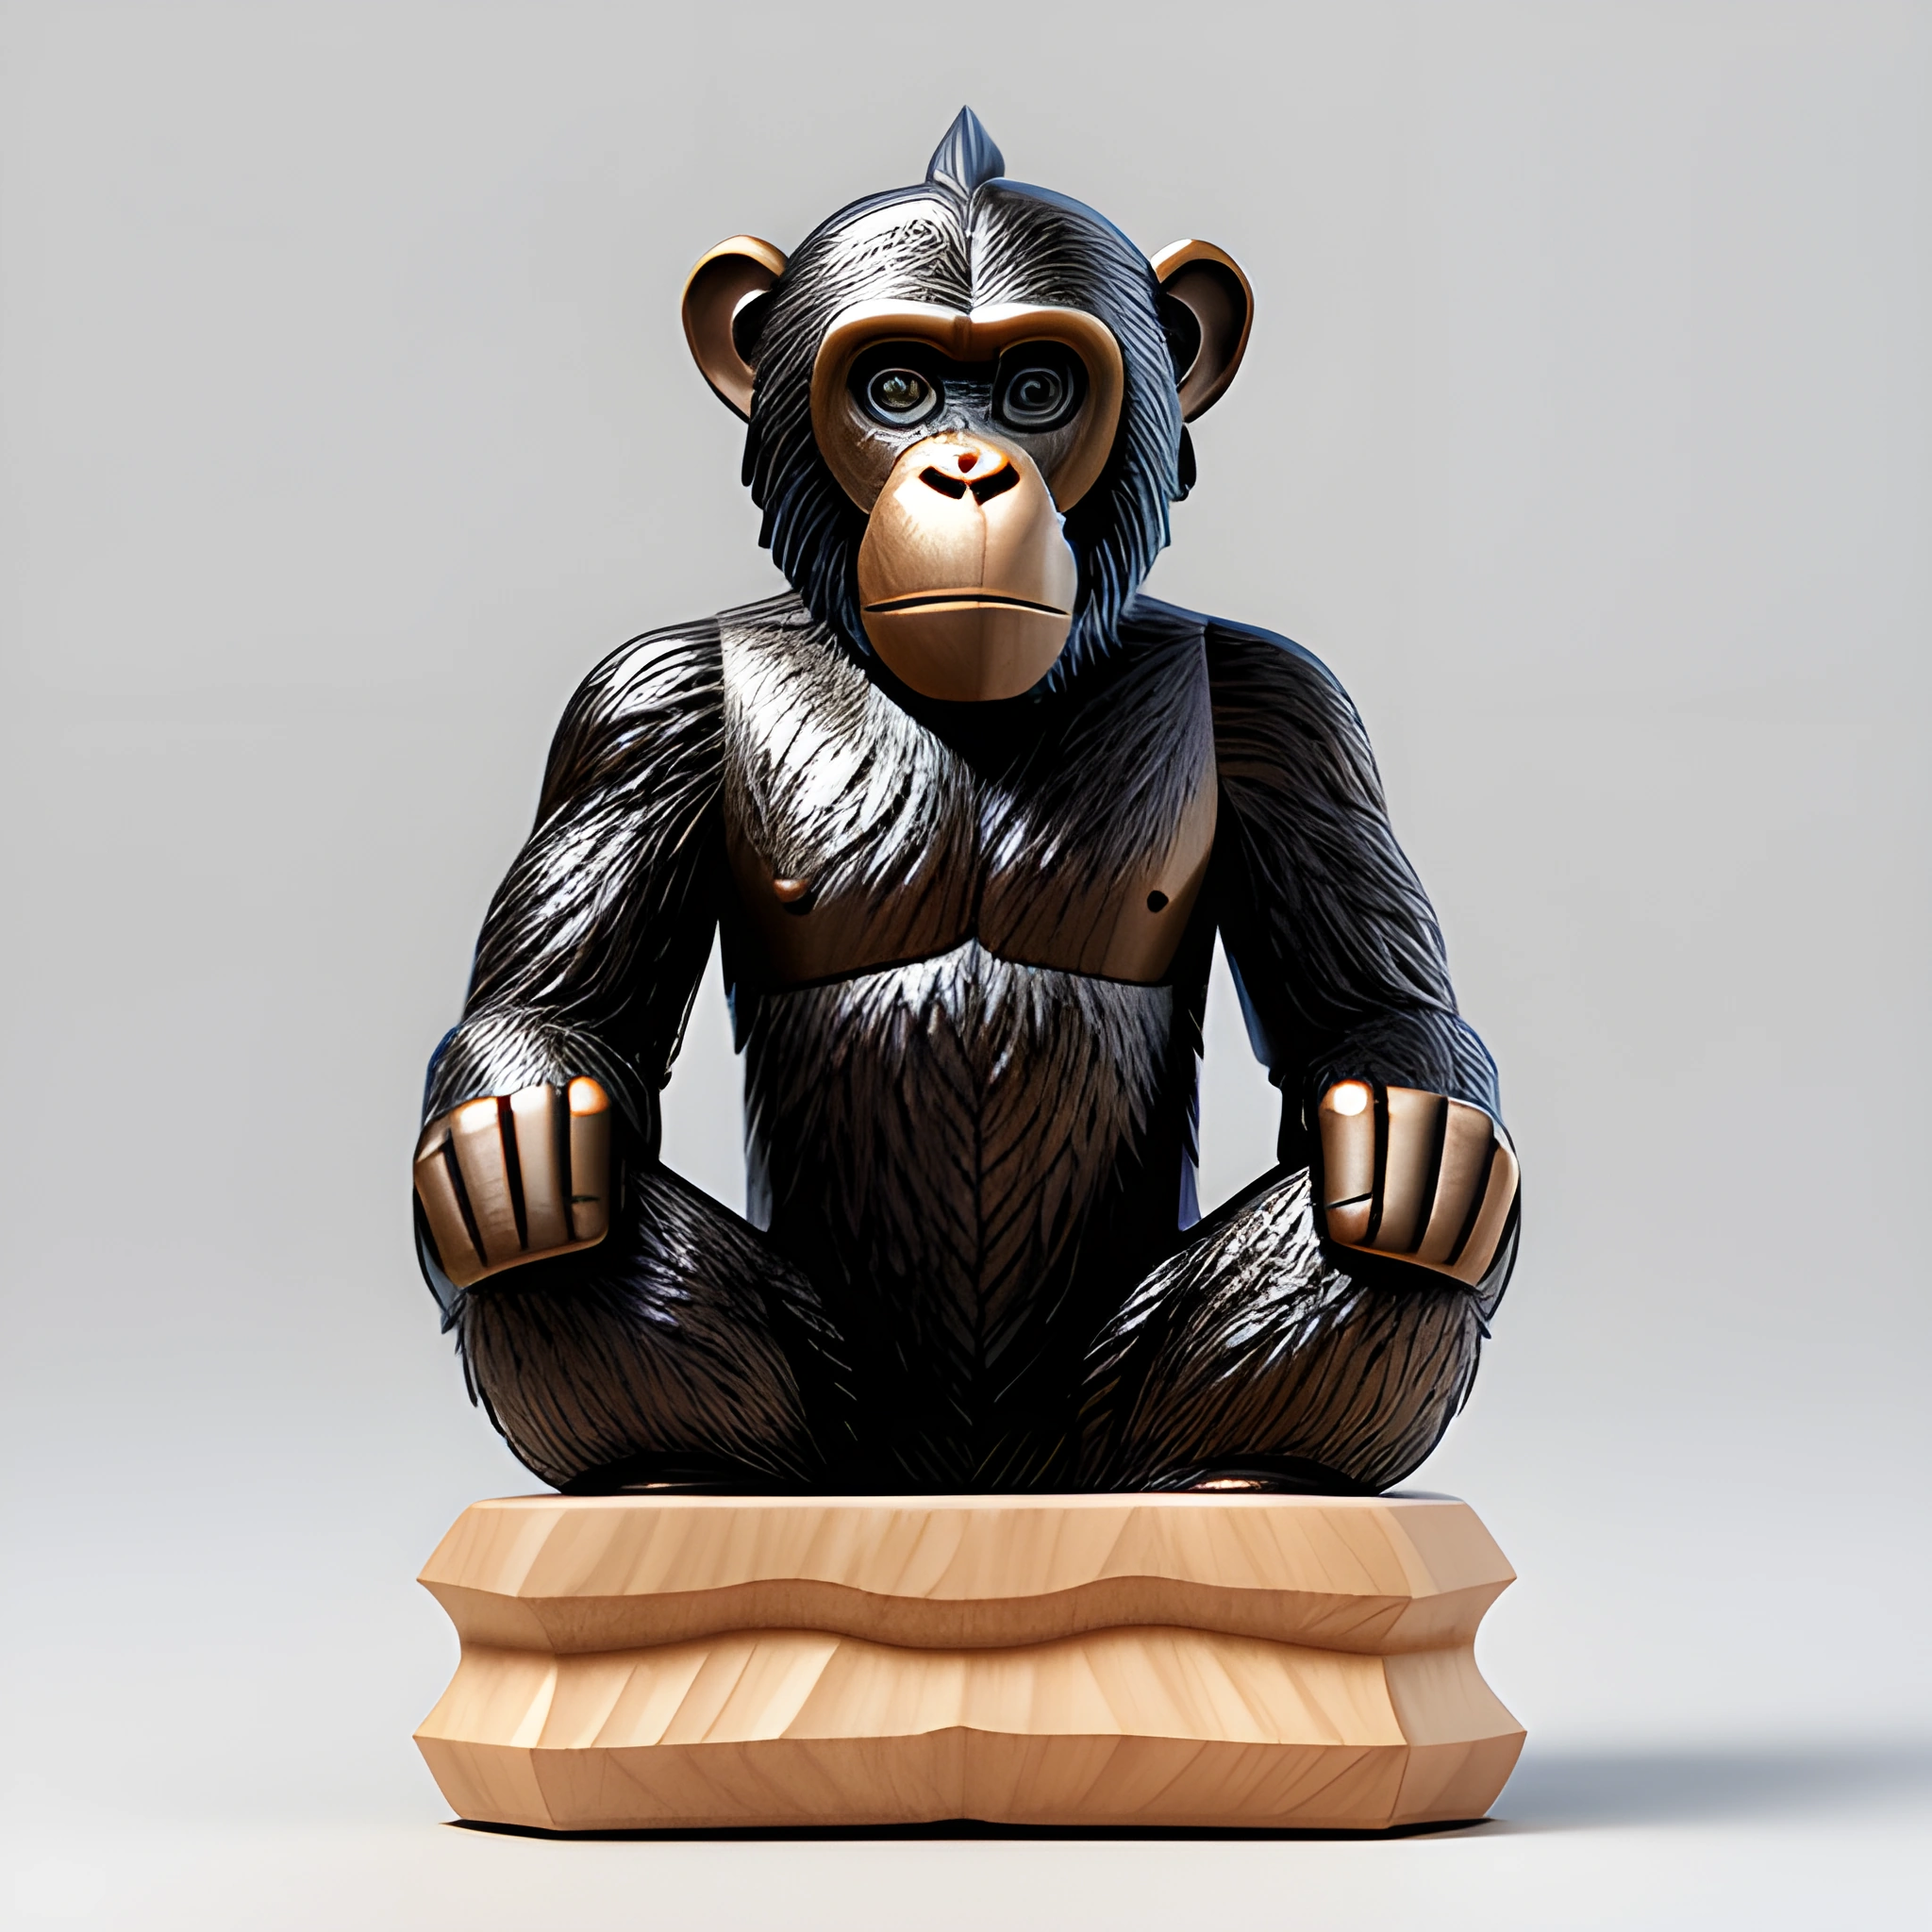 statue of a monkey sitting on a wooden block